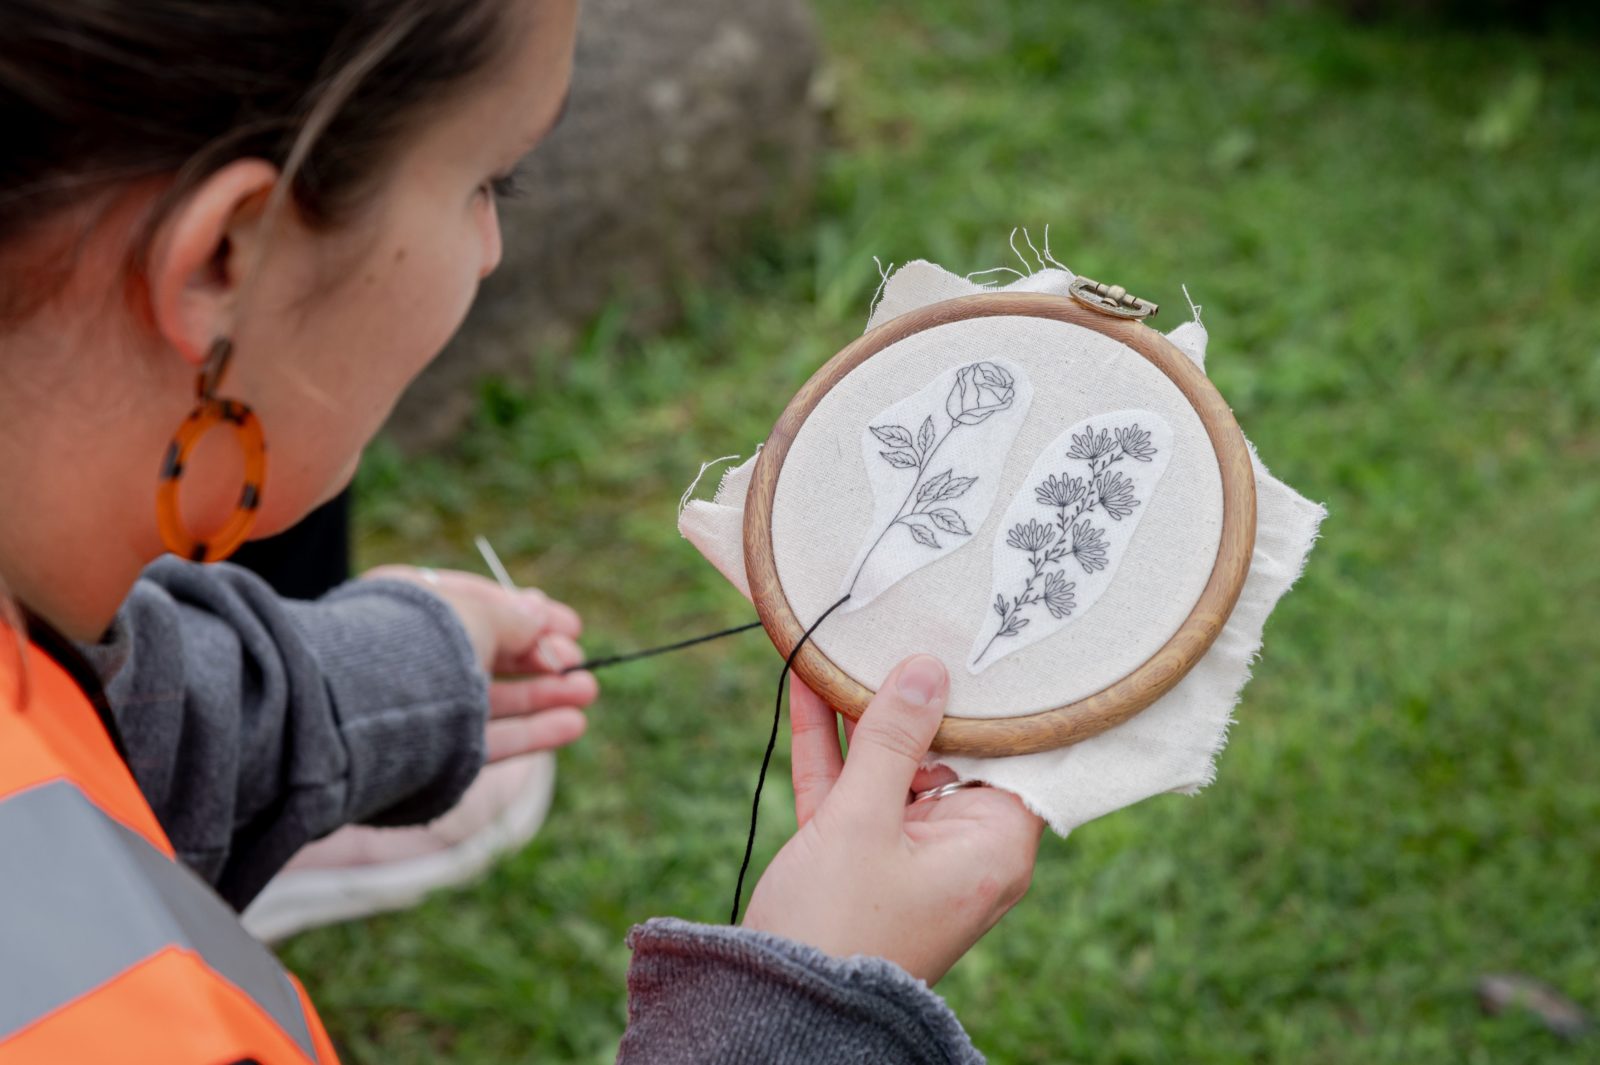 A girl is photographed embroidering 2 flowers onto an embroidery hoop outdoors.